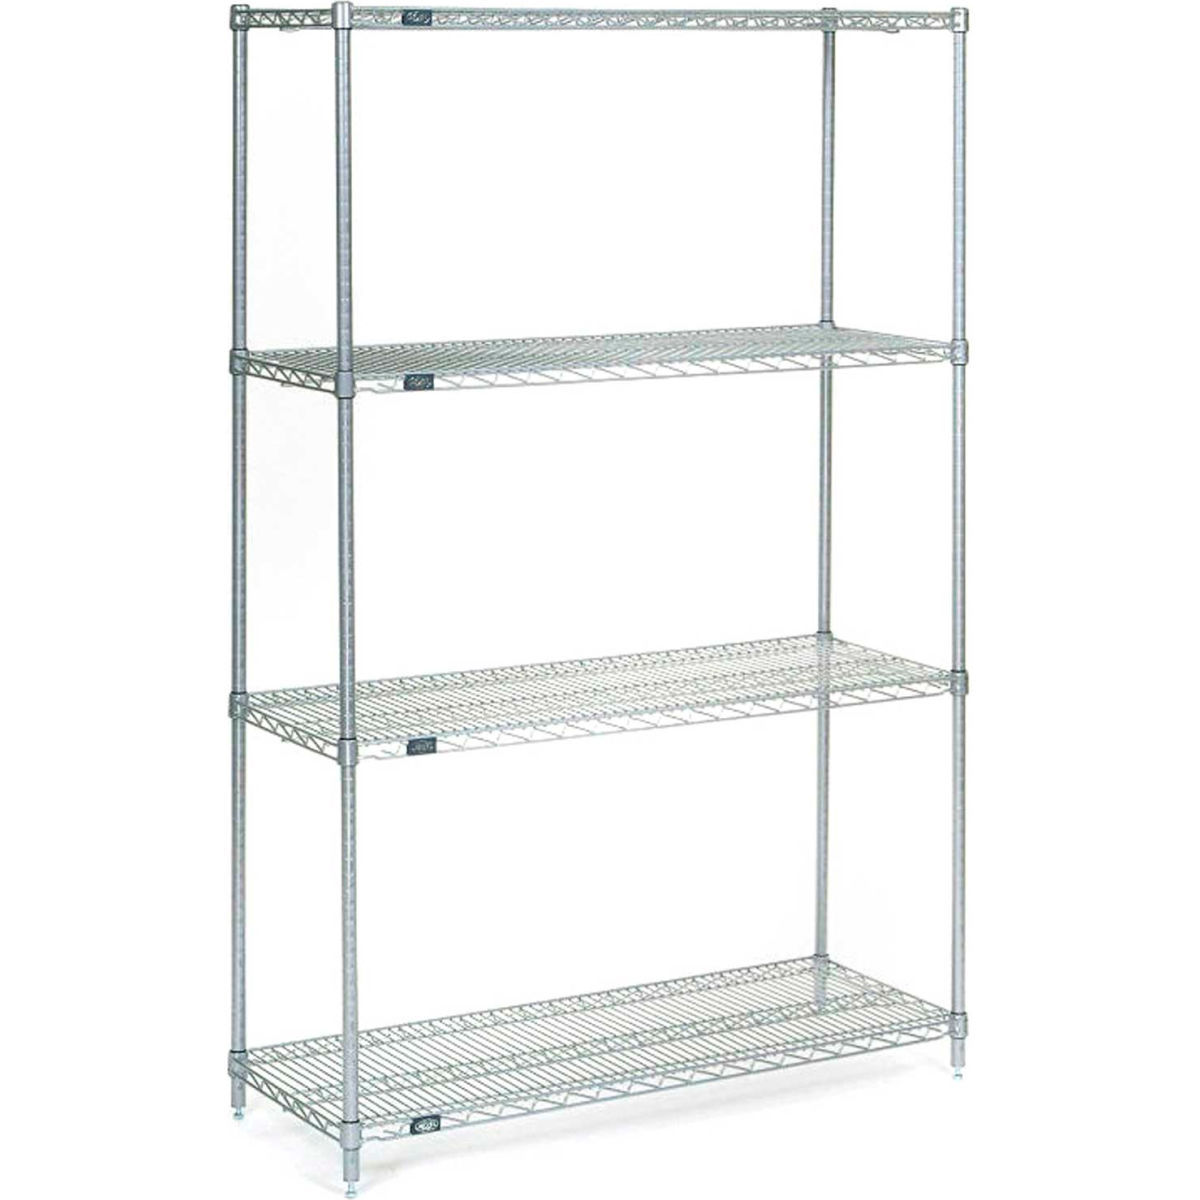 Picture of Global Industrial 14488S 86 x 48 x 14 in. Nexel Stainless Steel Starter Wire Shelving